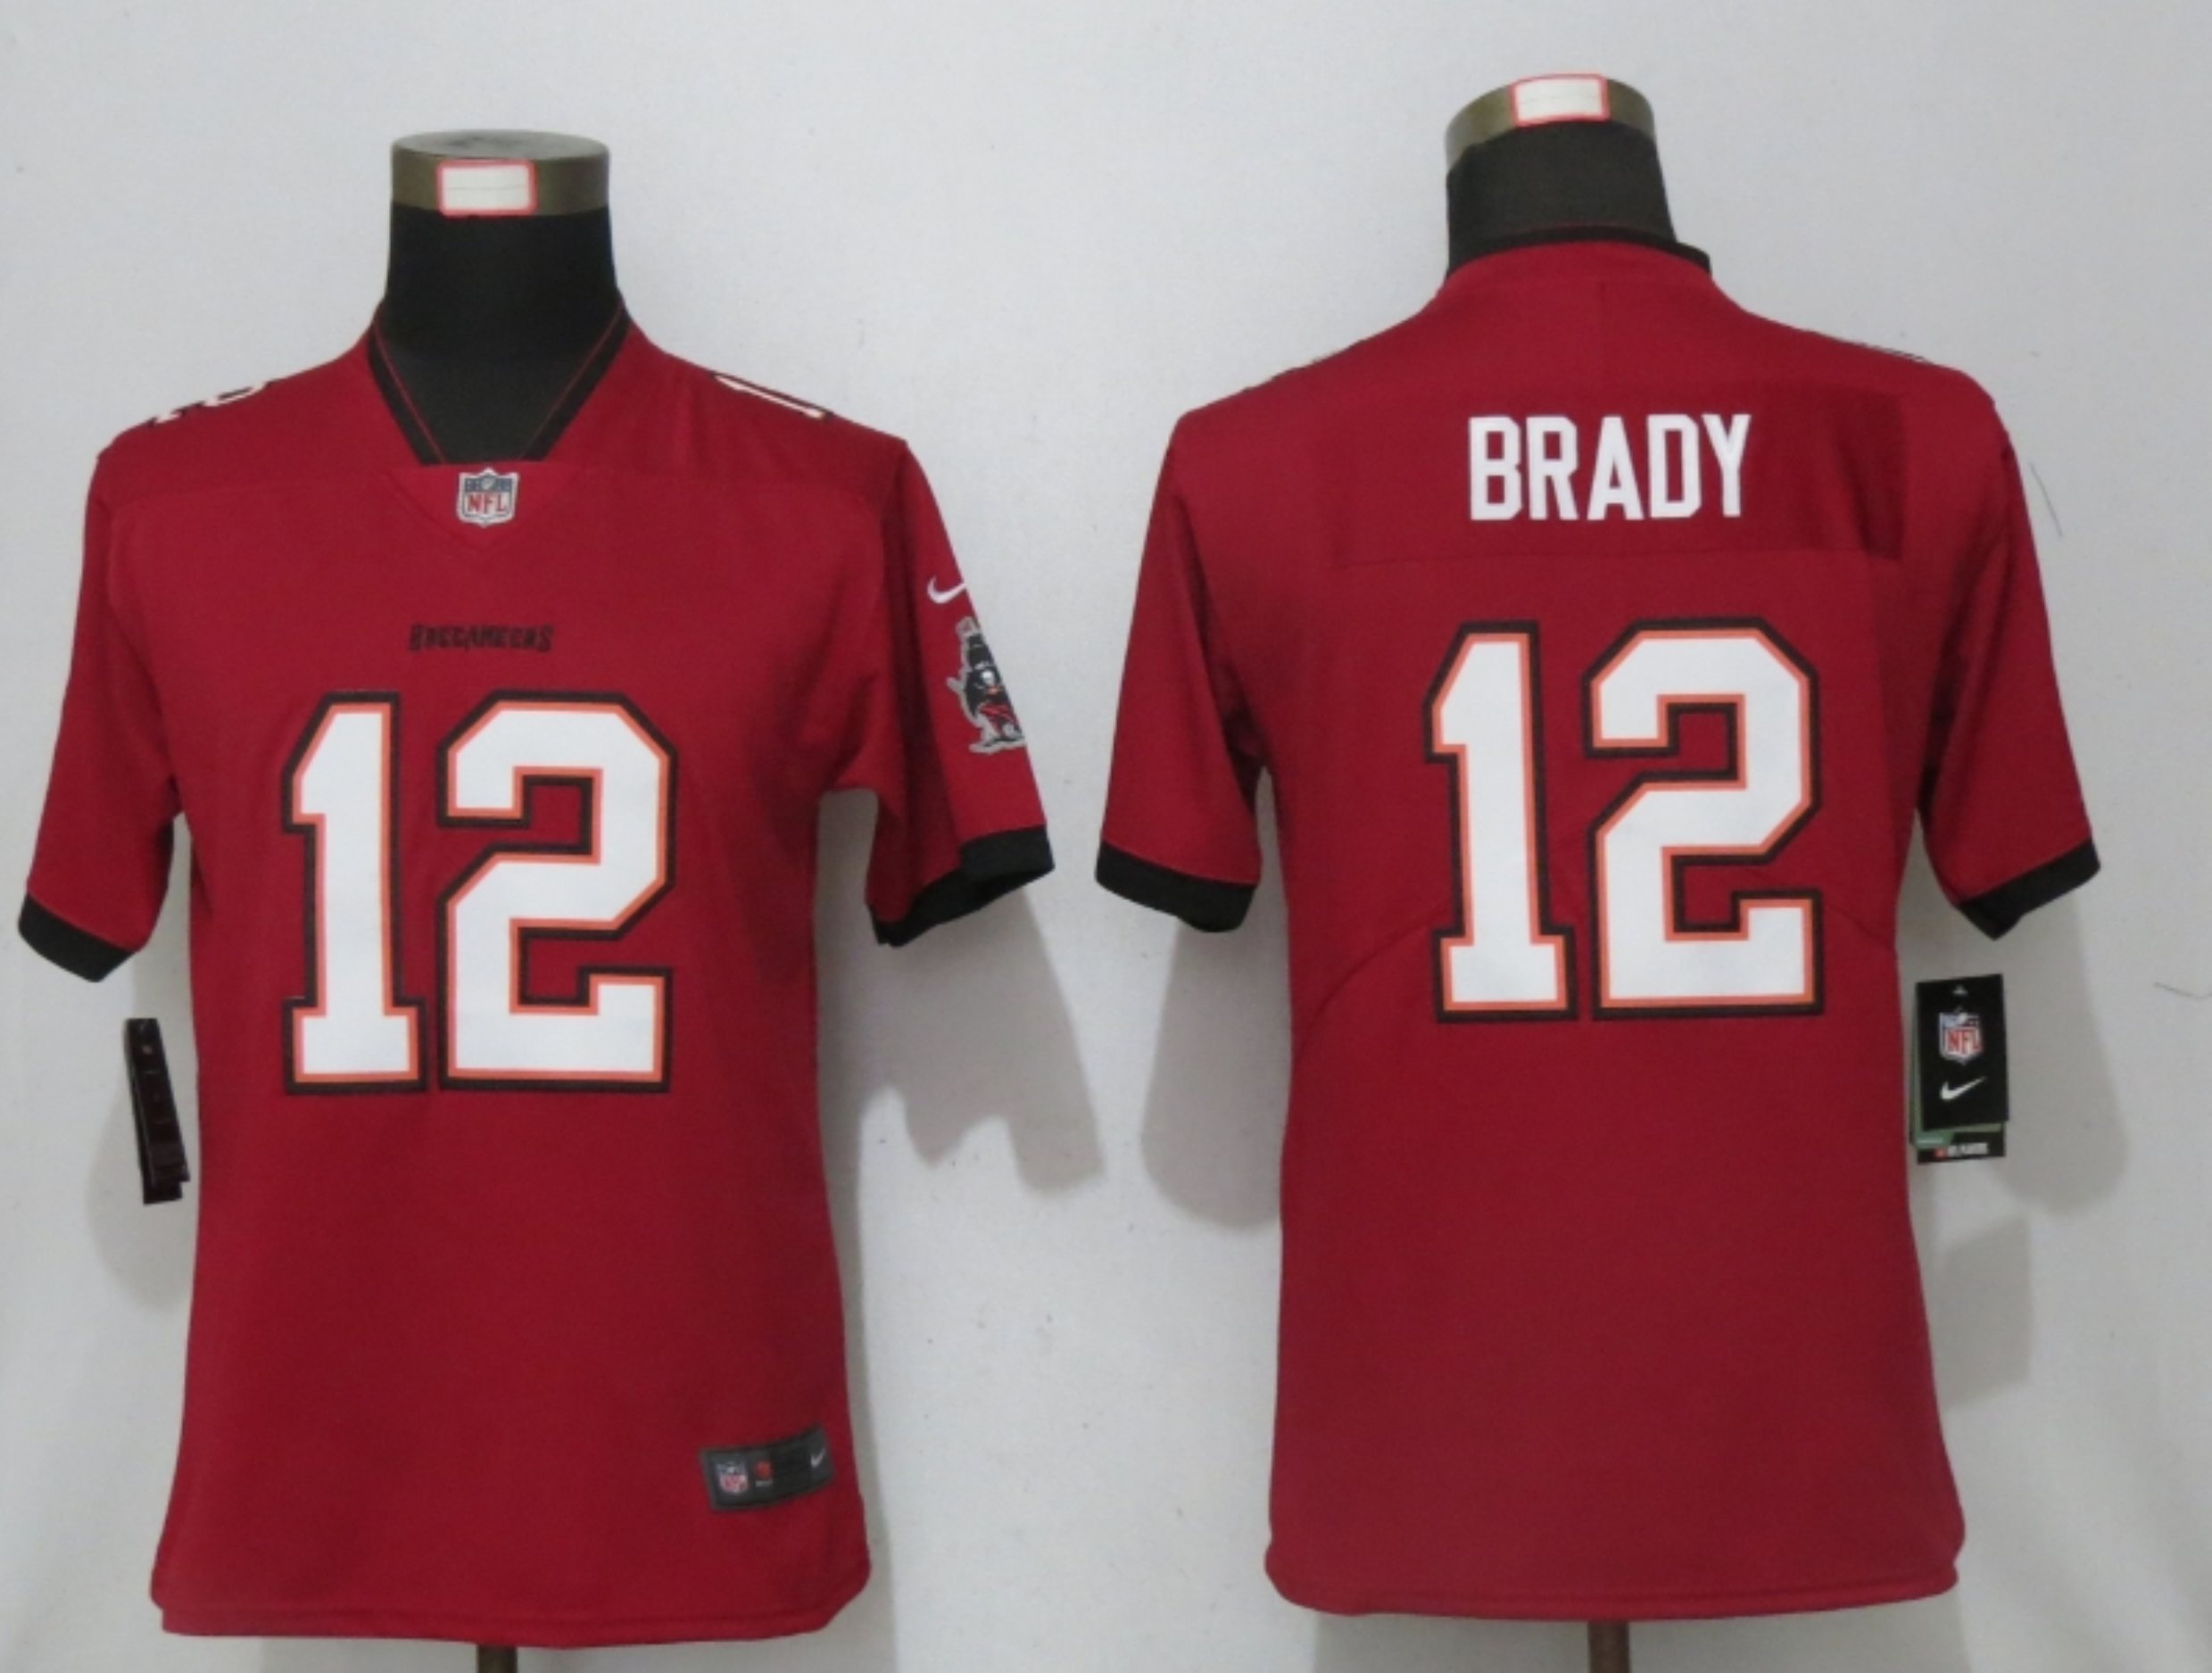 Wholesale Cheap NFL Jerseys With Stitched Name NFL Jerseys From China